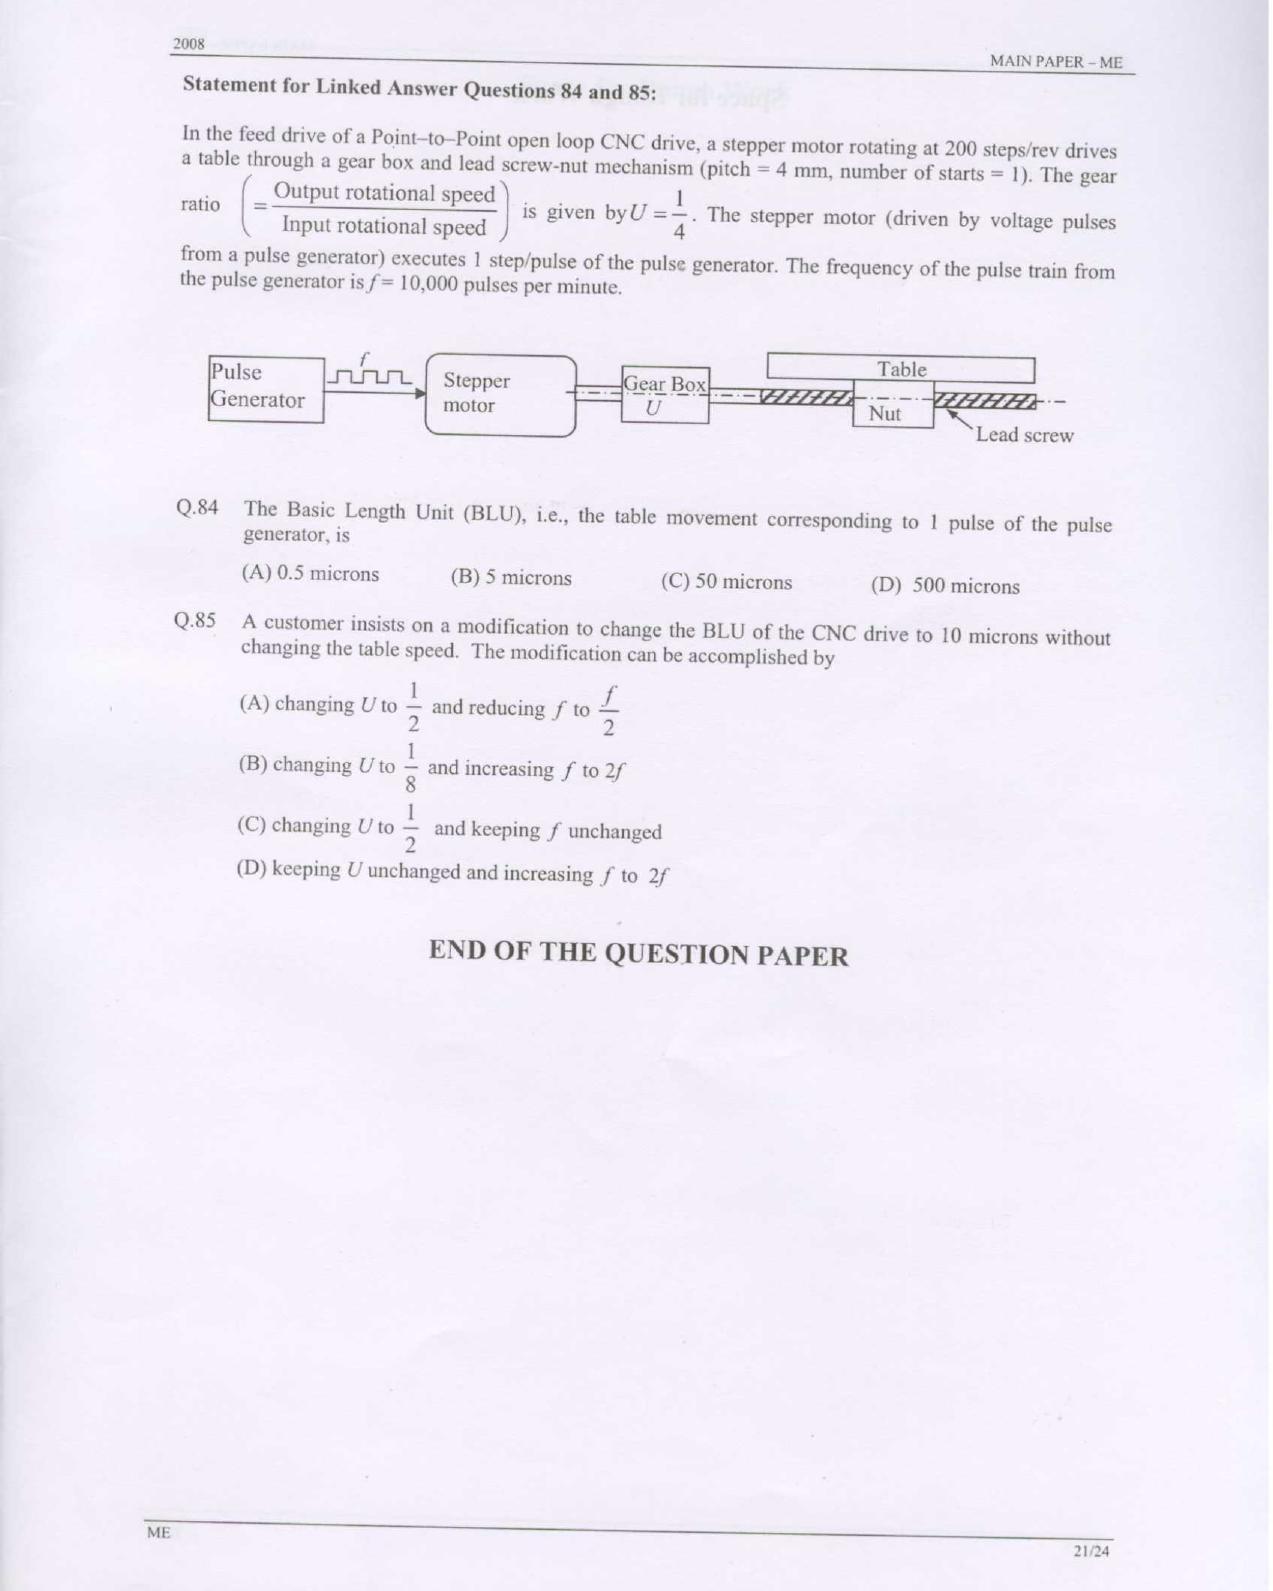 GATE 2008 Mechanical Engineering (ME) Question Paper with Answer Key - Page 21